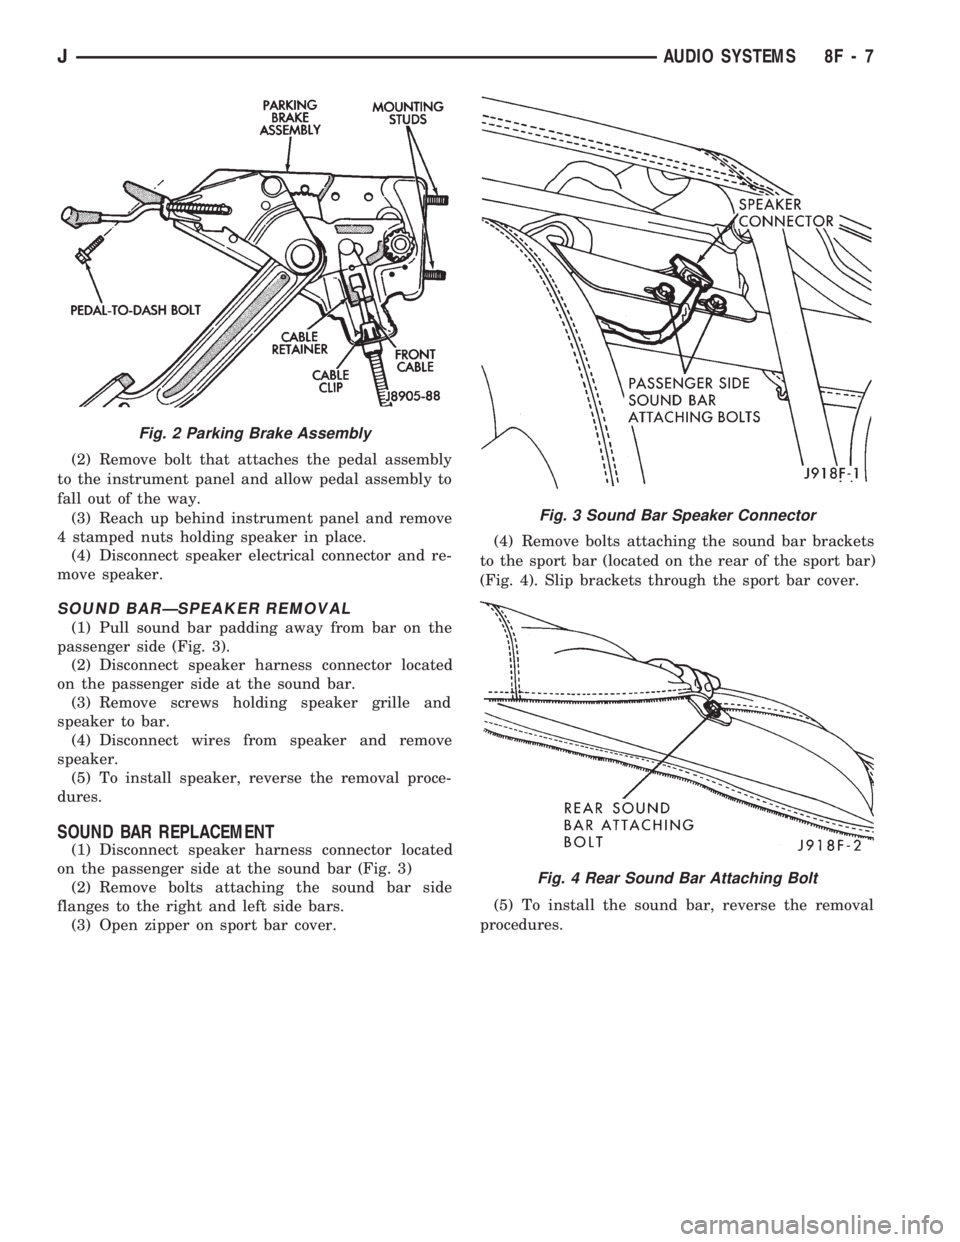 JEEP WRANGLER 1994  Owners Manual Fig. 3 Sound Bar Speaker Connector
Fig. 4 Rear Sound Bar Attaching Bolt
JAUDIO SYSTEMS 8F - 7 